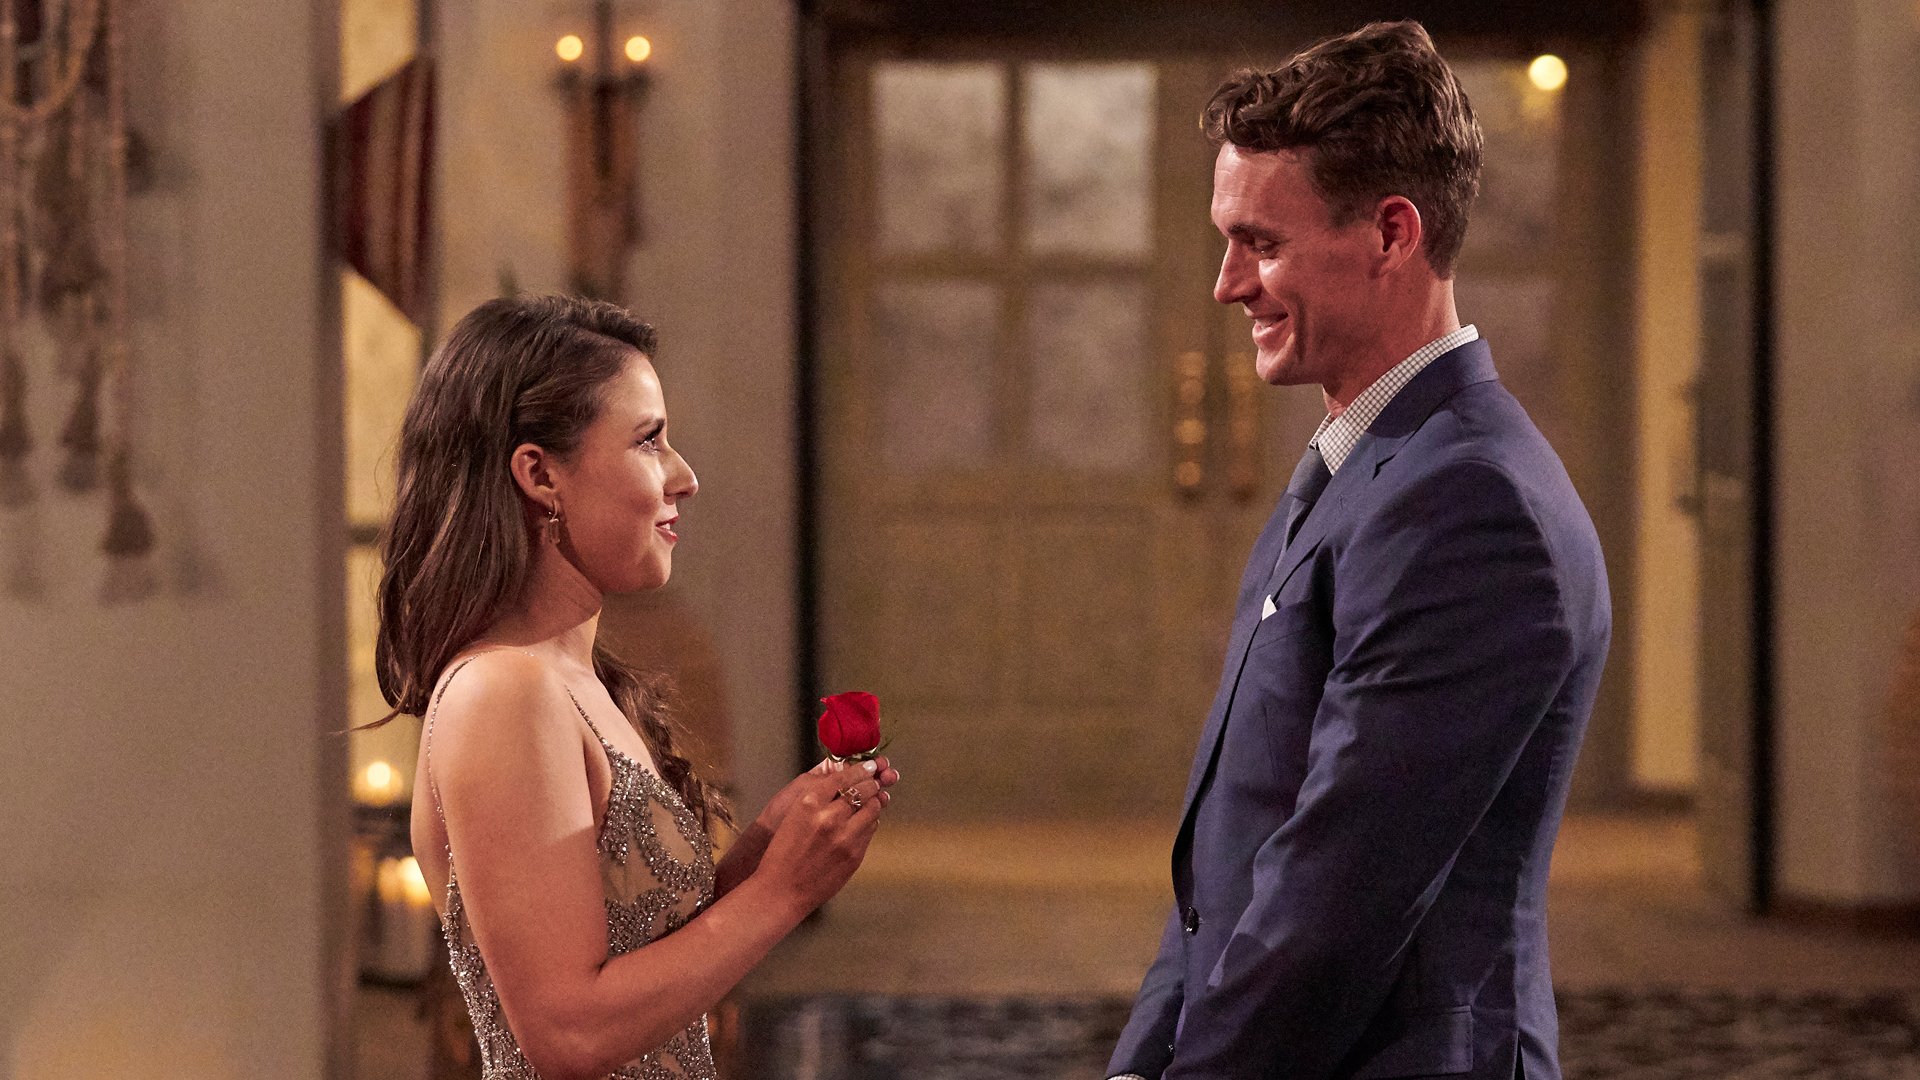 Katie Thurston gives Mike Planeta (Mike P.) a rose in ‘The Bachelorette’ Season 17 Episode 4